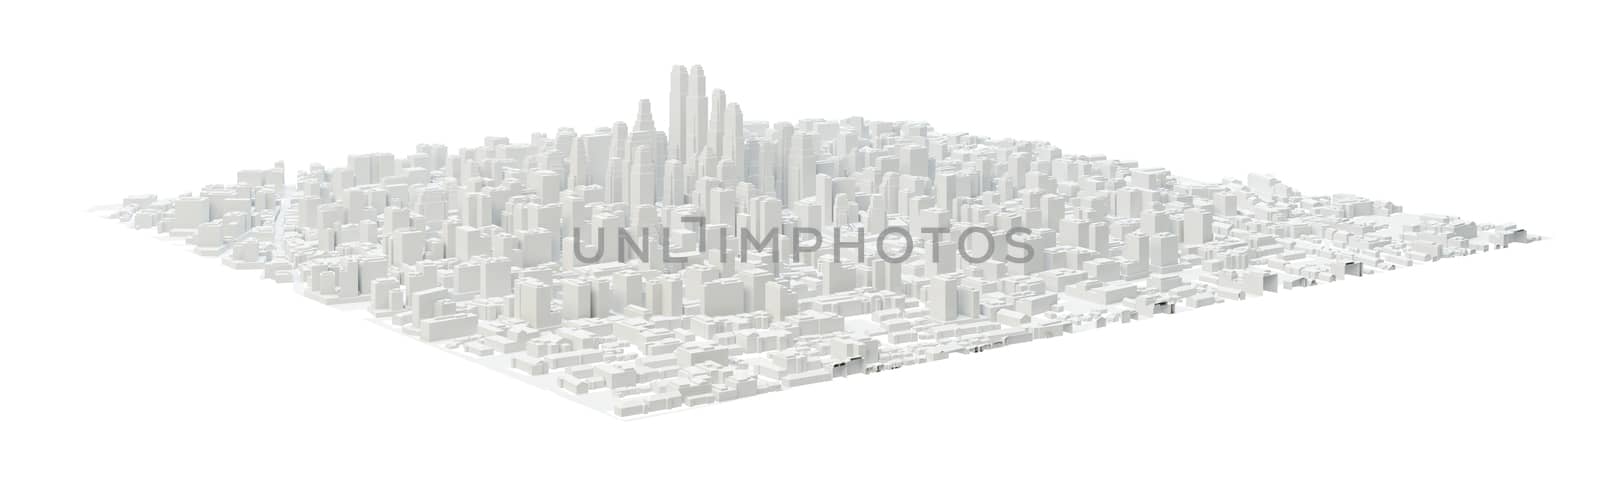 White City Buildings, Aerial View. 3D Illustration